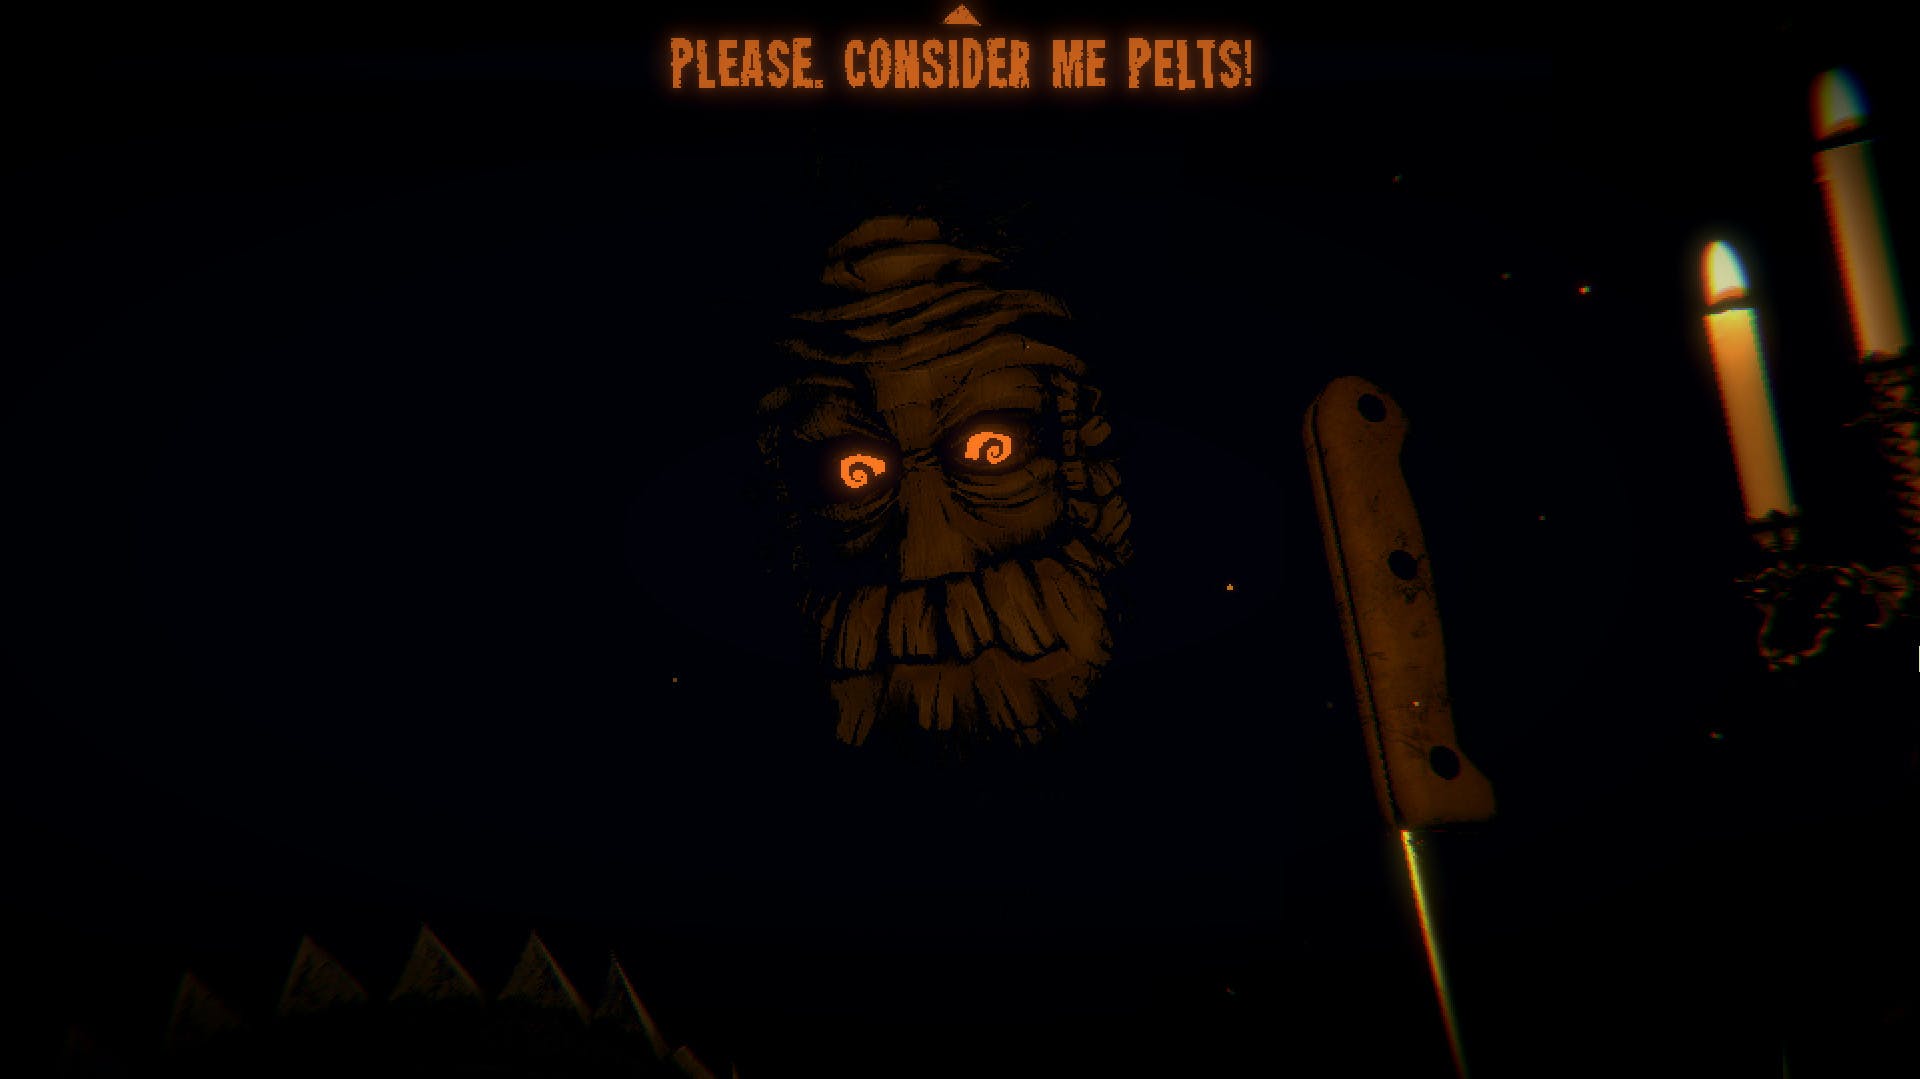 Screenshot of the Trapper from Inscryption asking the player to inspect his pelts